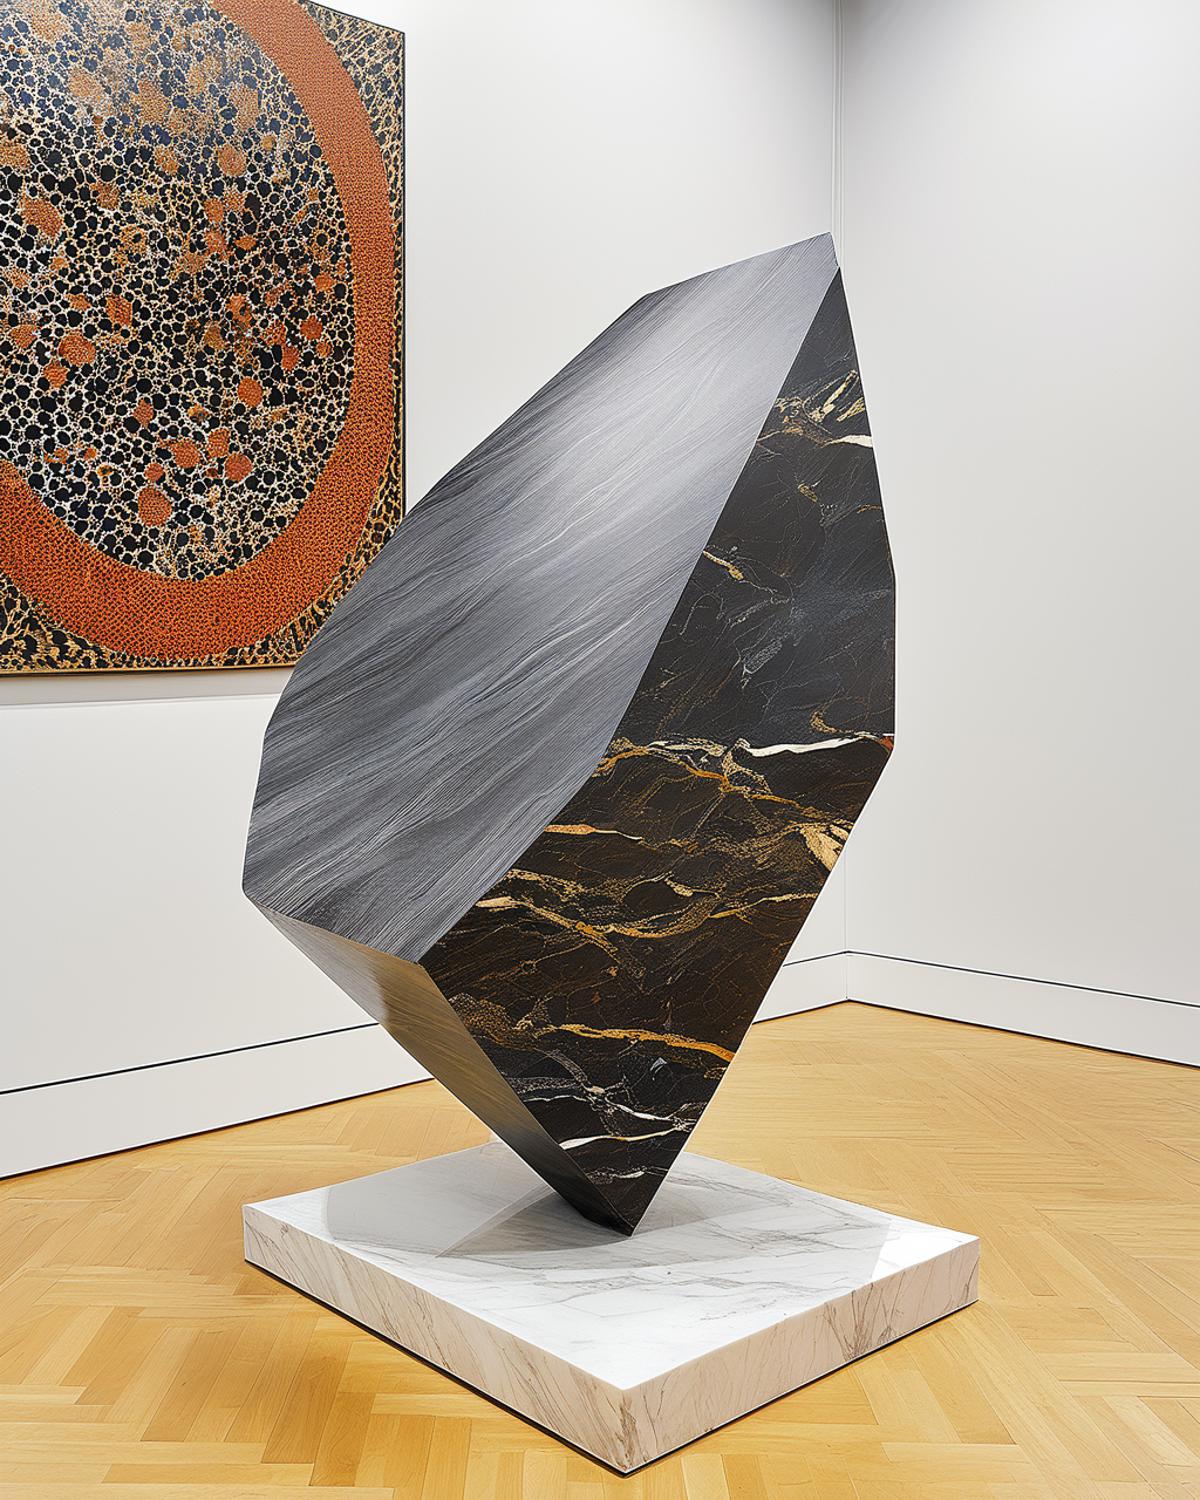 A large black and brown sculpture on a white base.